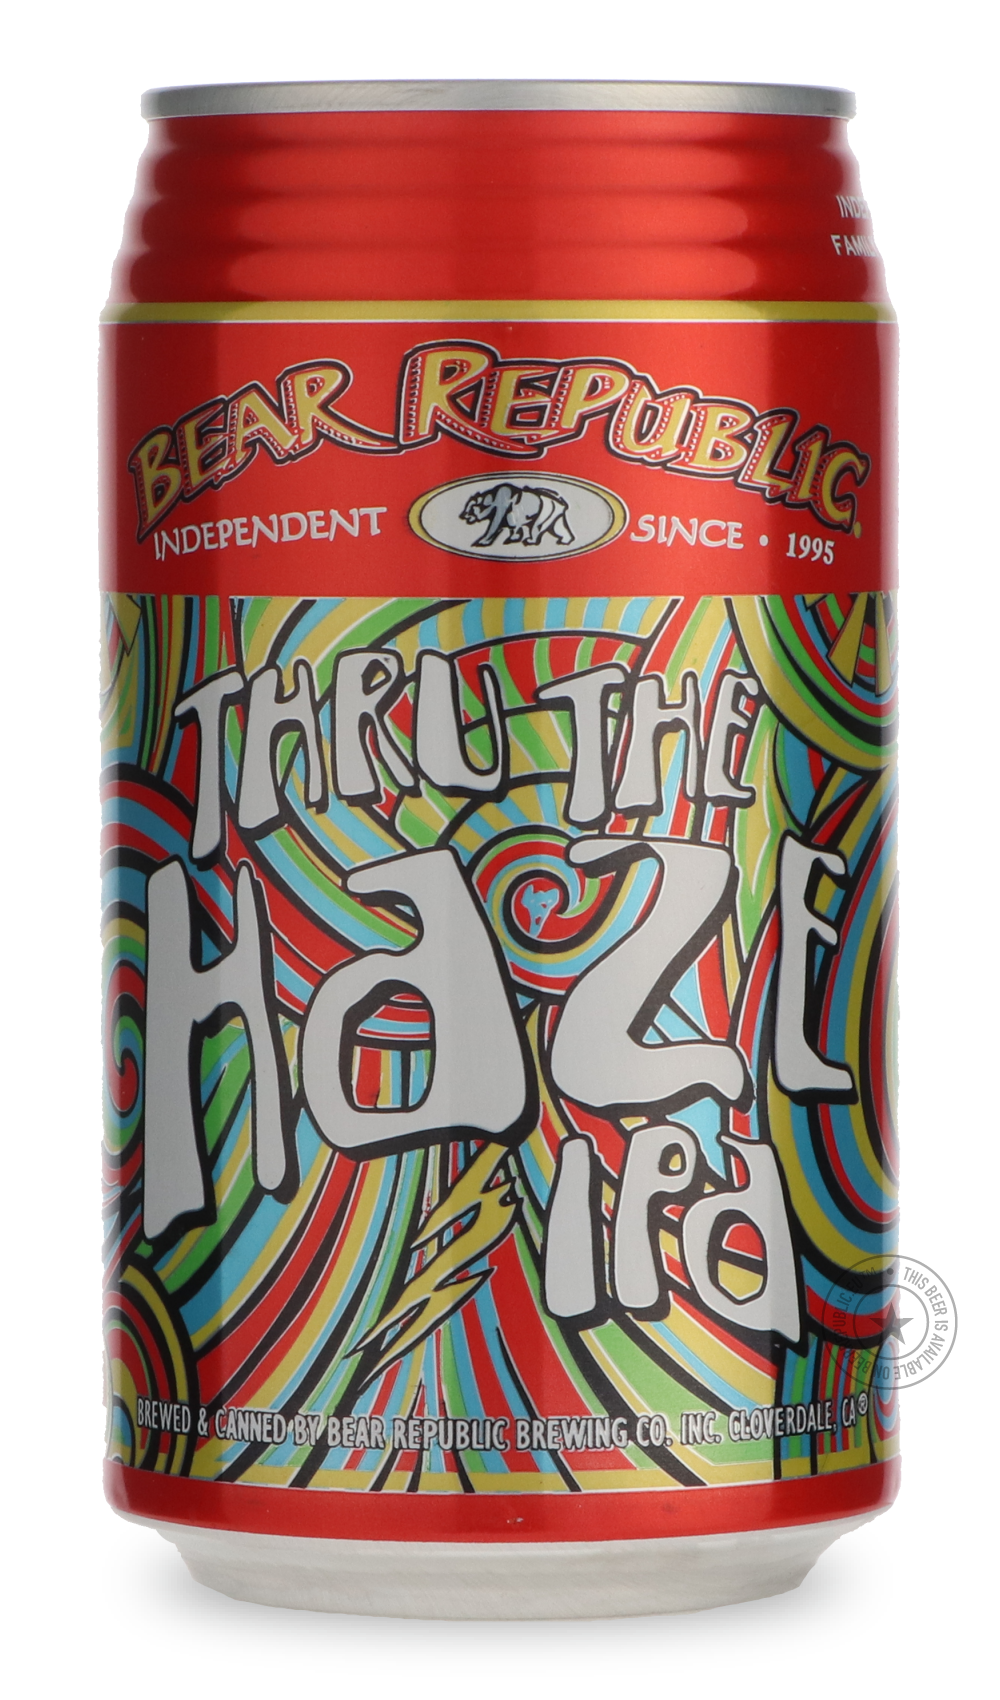 -Bear Republic- Thru the Haze-IPA- Only @ Beer Republic - The best online beer store for American & Canadian craft beer - Buy beer online from the USA and Canada - Bier online kopen - Amerikaans bier kopen - Craft beer store - Craft beer kopen - Amerikanisch bier kaufen - Bier online kaufen - Acheter biere online - IPA - Stout - Porter - New England IPA - Hazy IPA - Imperial Stout - Barrel Aged - Barrel Aged Imperial Stout - Brown - Dark beer - Blond - Blonde - Pilsner - Lager - Wheat - Weizen - Amber - Bar